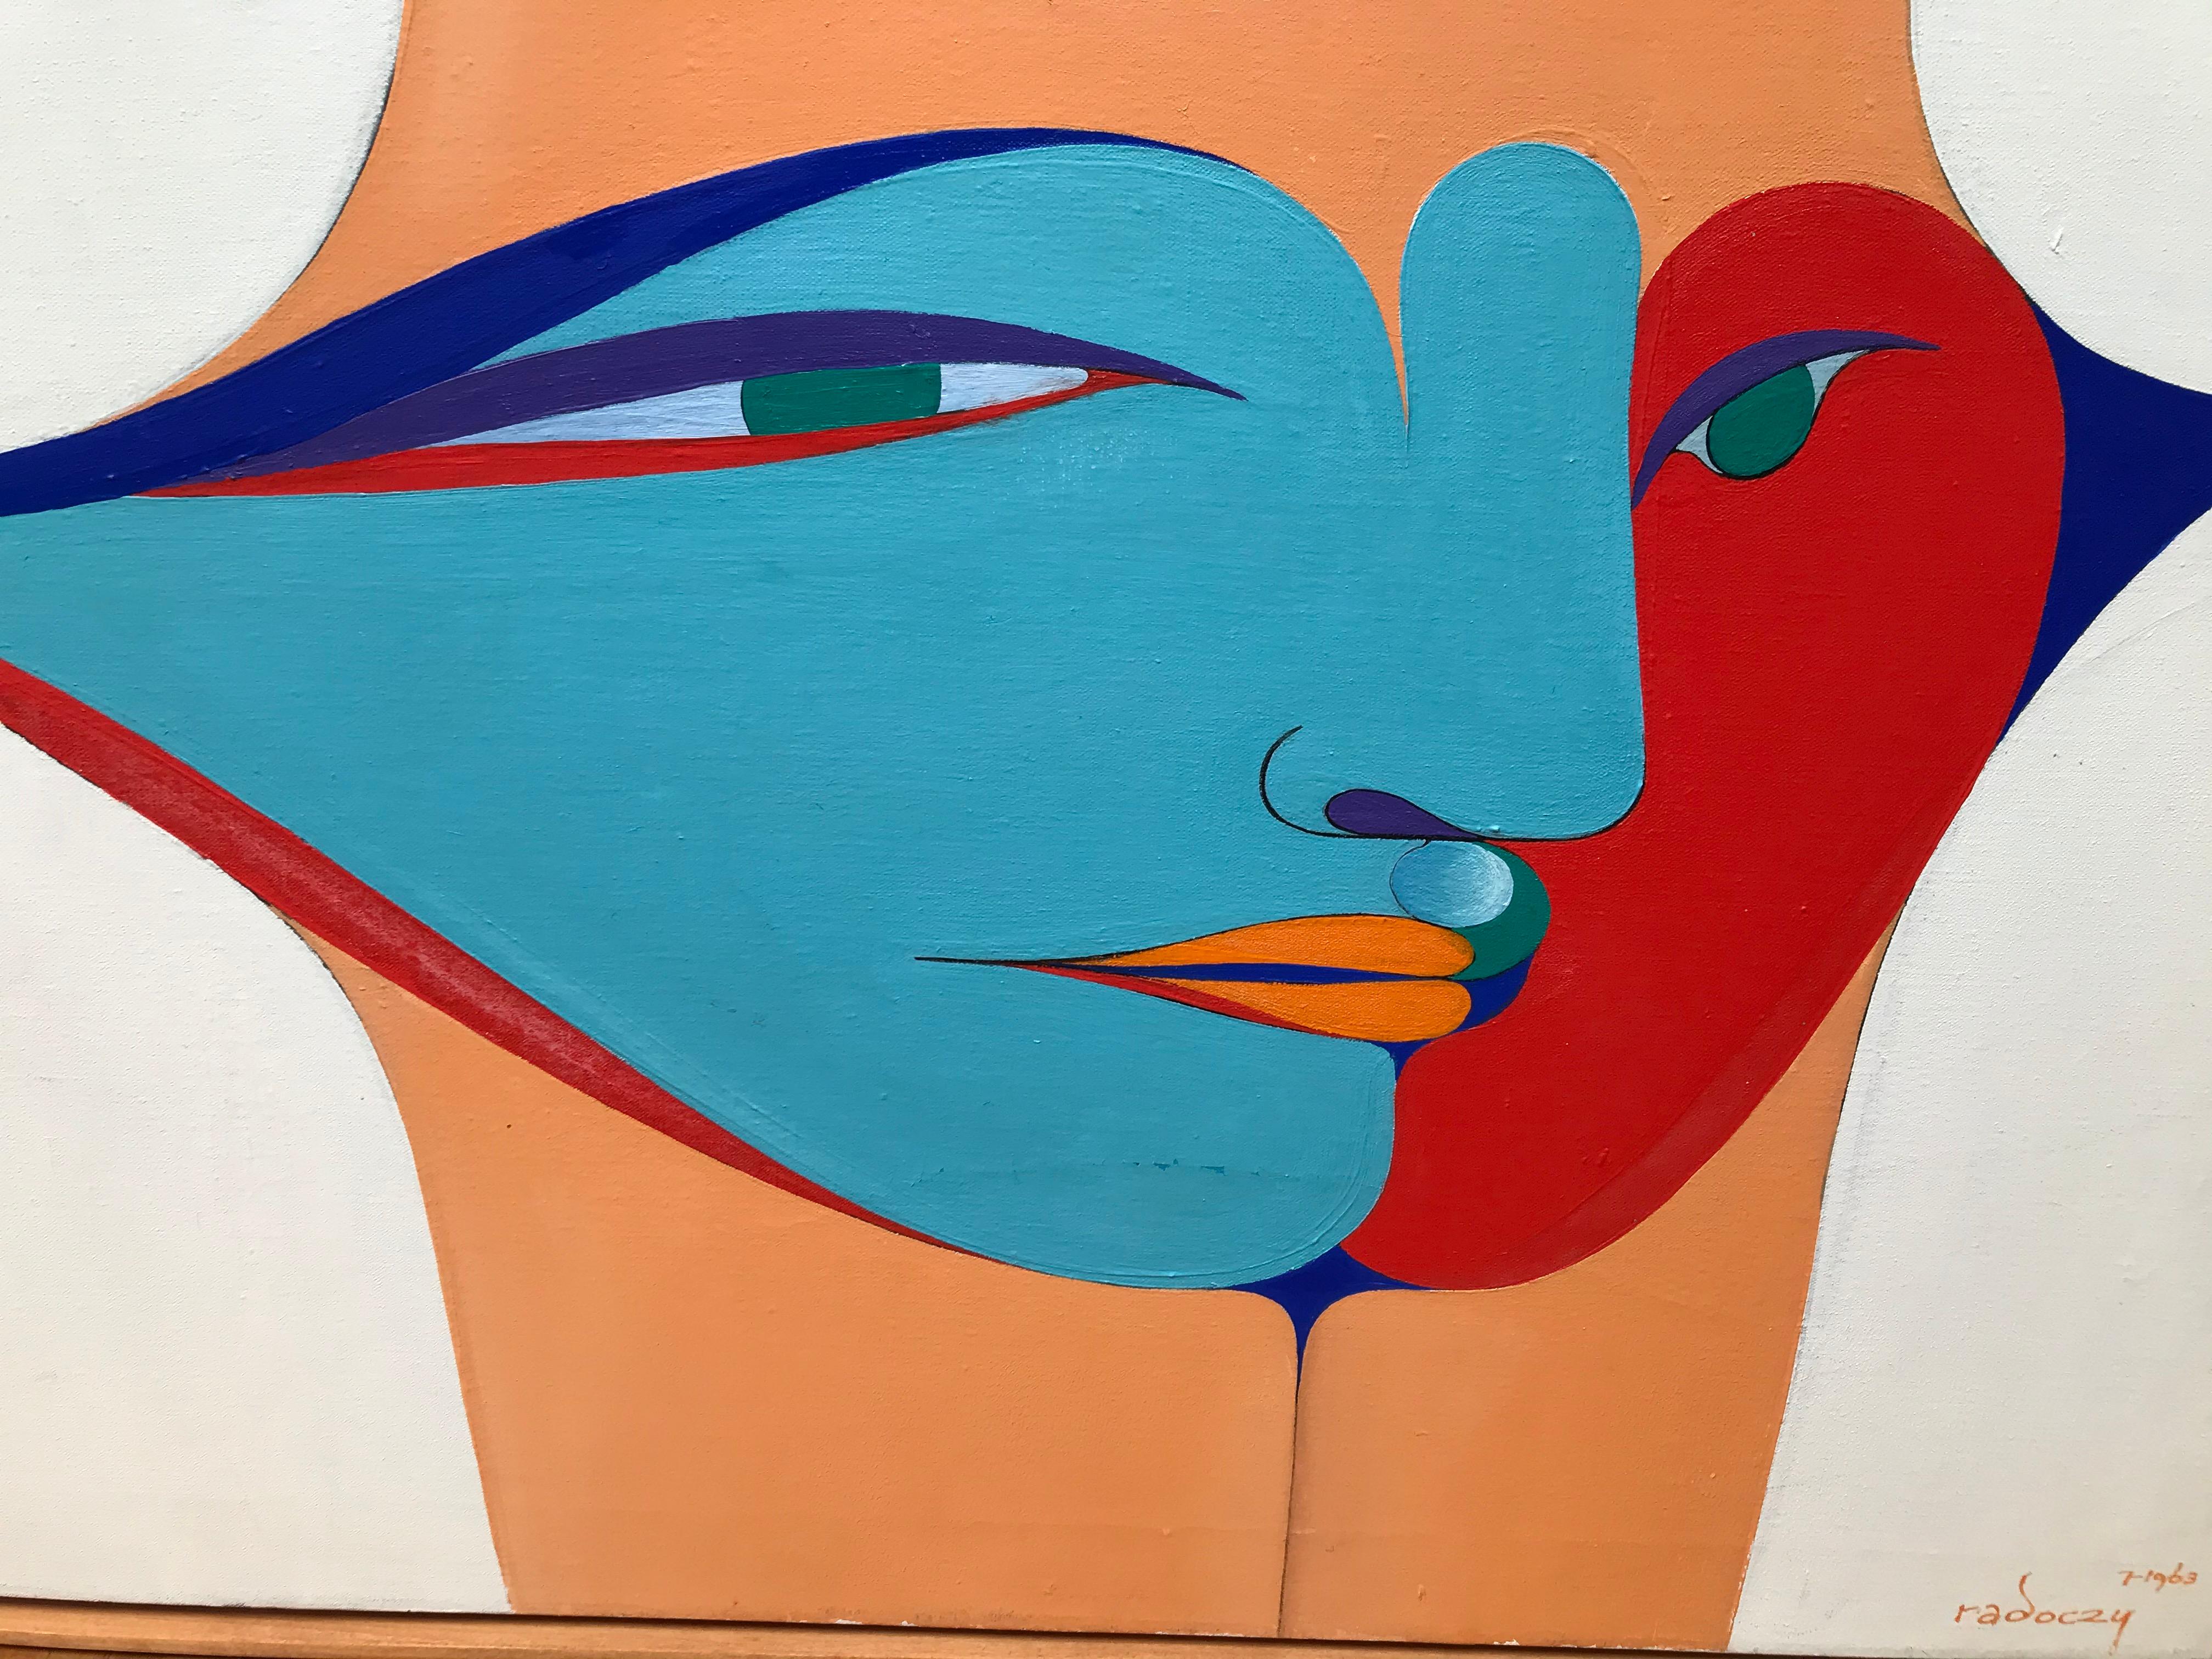 Another eye-catching piece by Radoczy showcases a woman's abdomen covered by a wide whimsical face reaching each side of the canvas. Radoczy has mastered using radiant colors and clean lines, providing us with yet another stunning piece. Albert